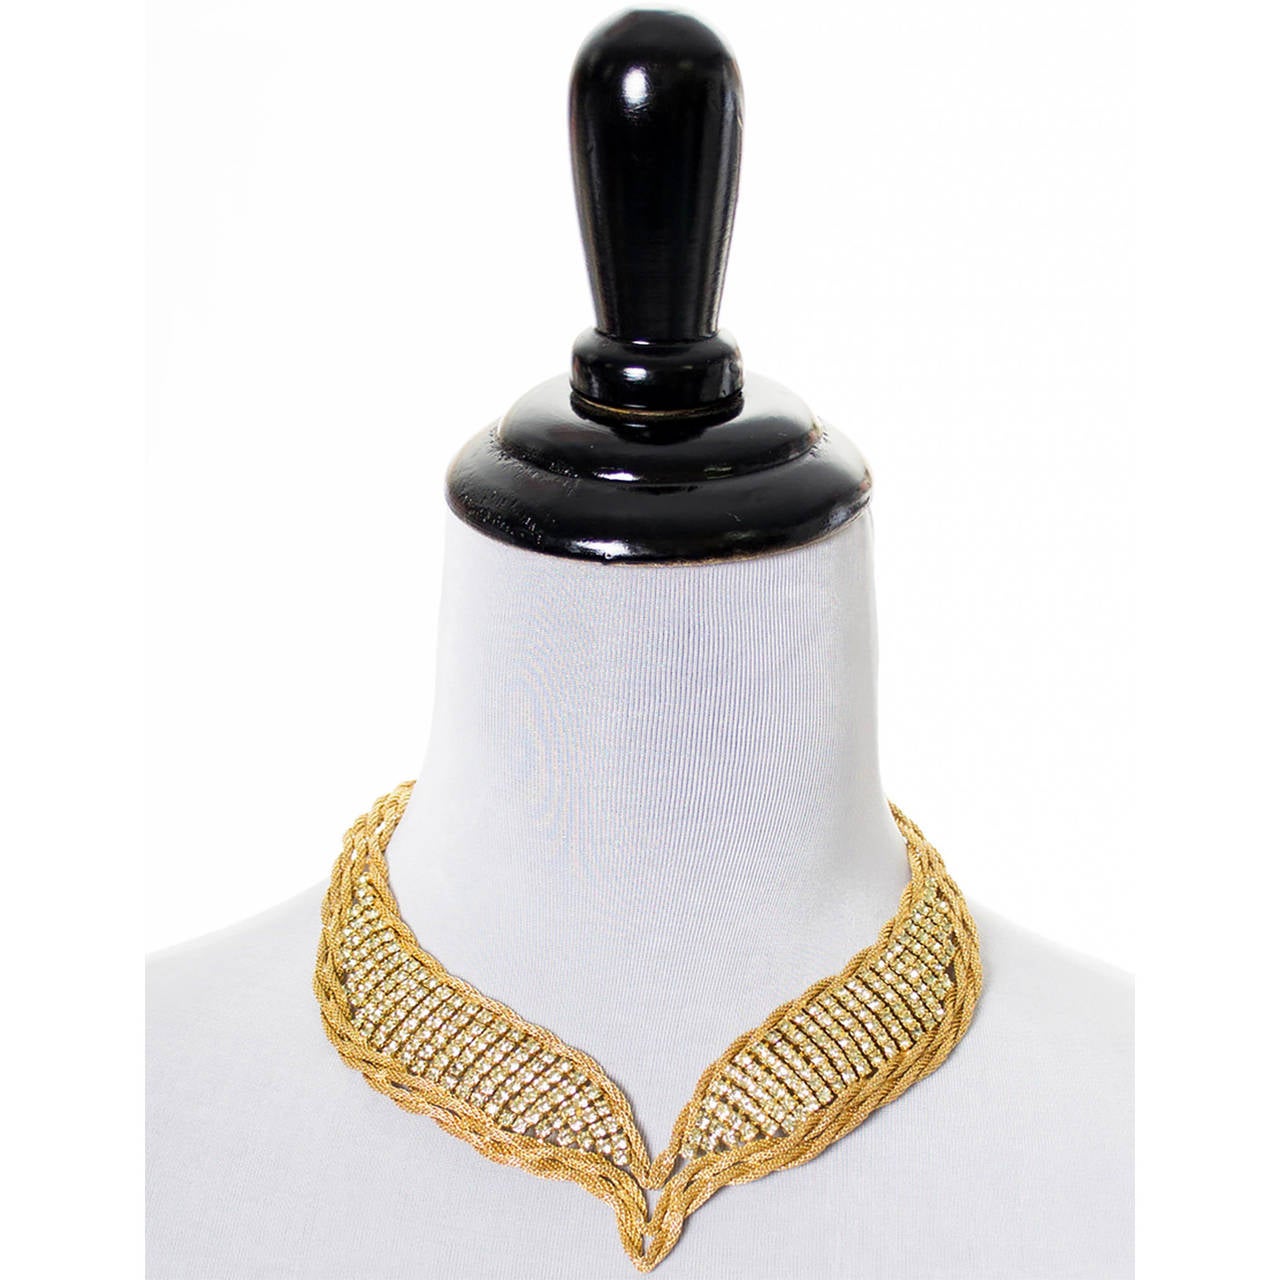 This is a gorgeous Hattie Carnegie gold tone woven vintage necklace with brilliant rhinestones!  The necklace is 19